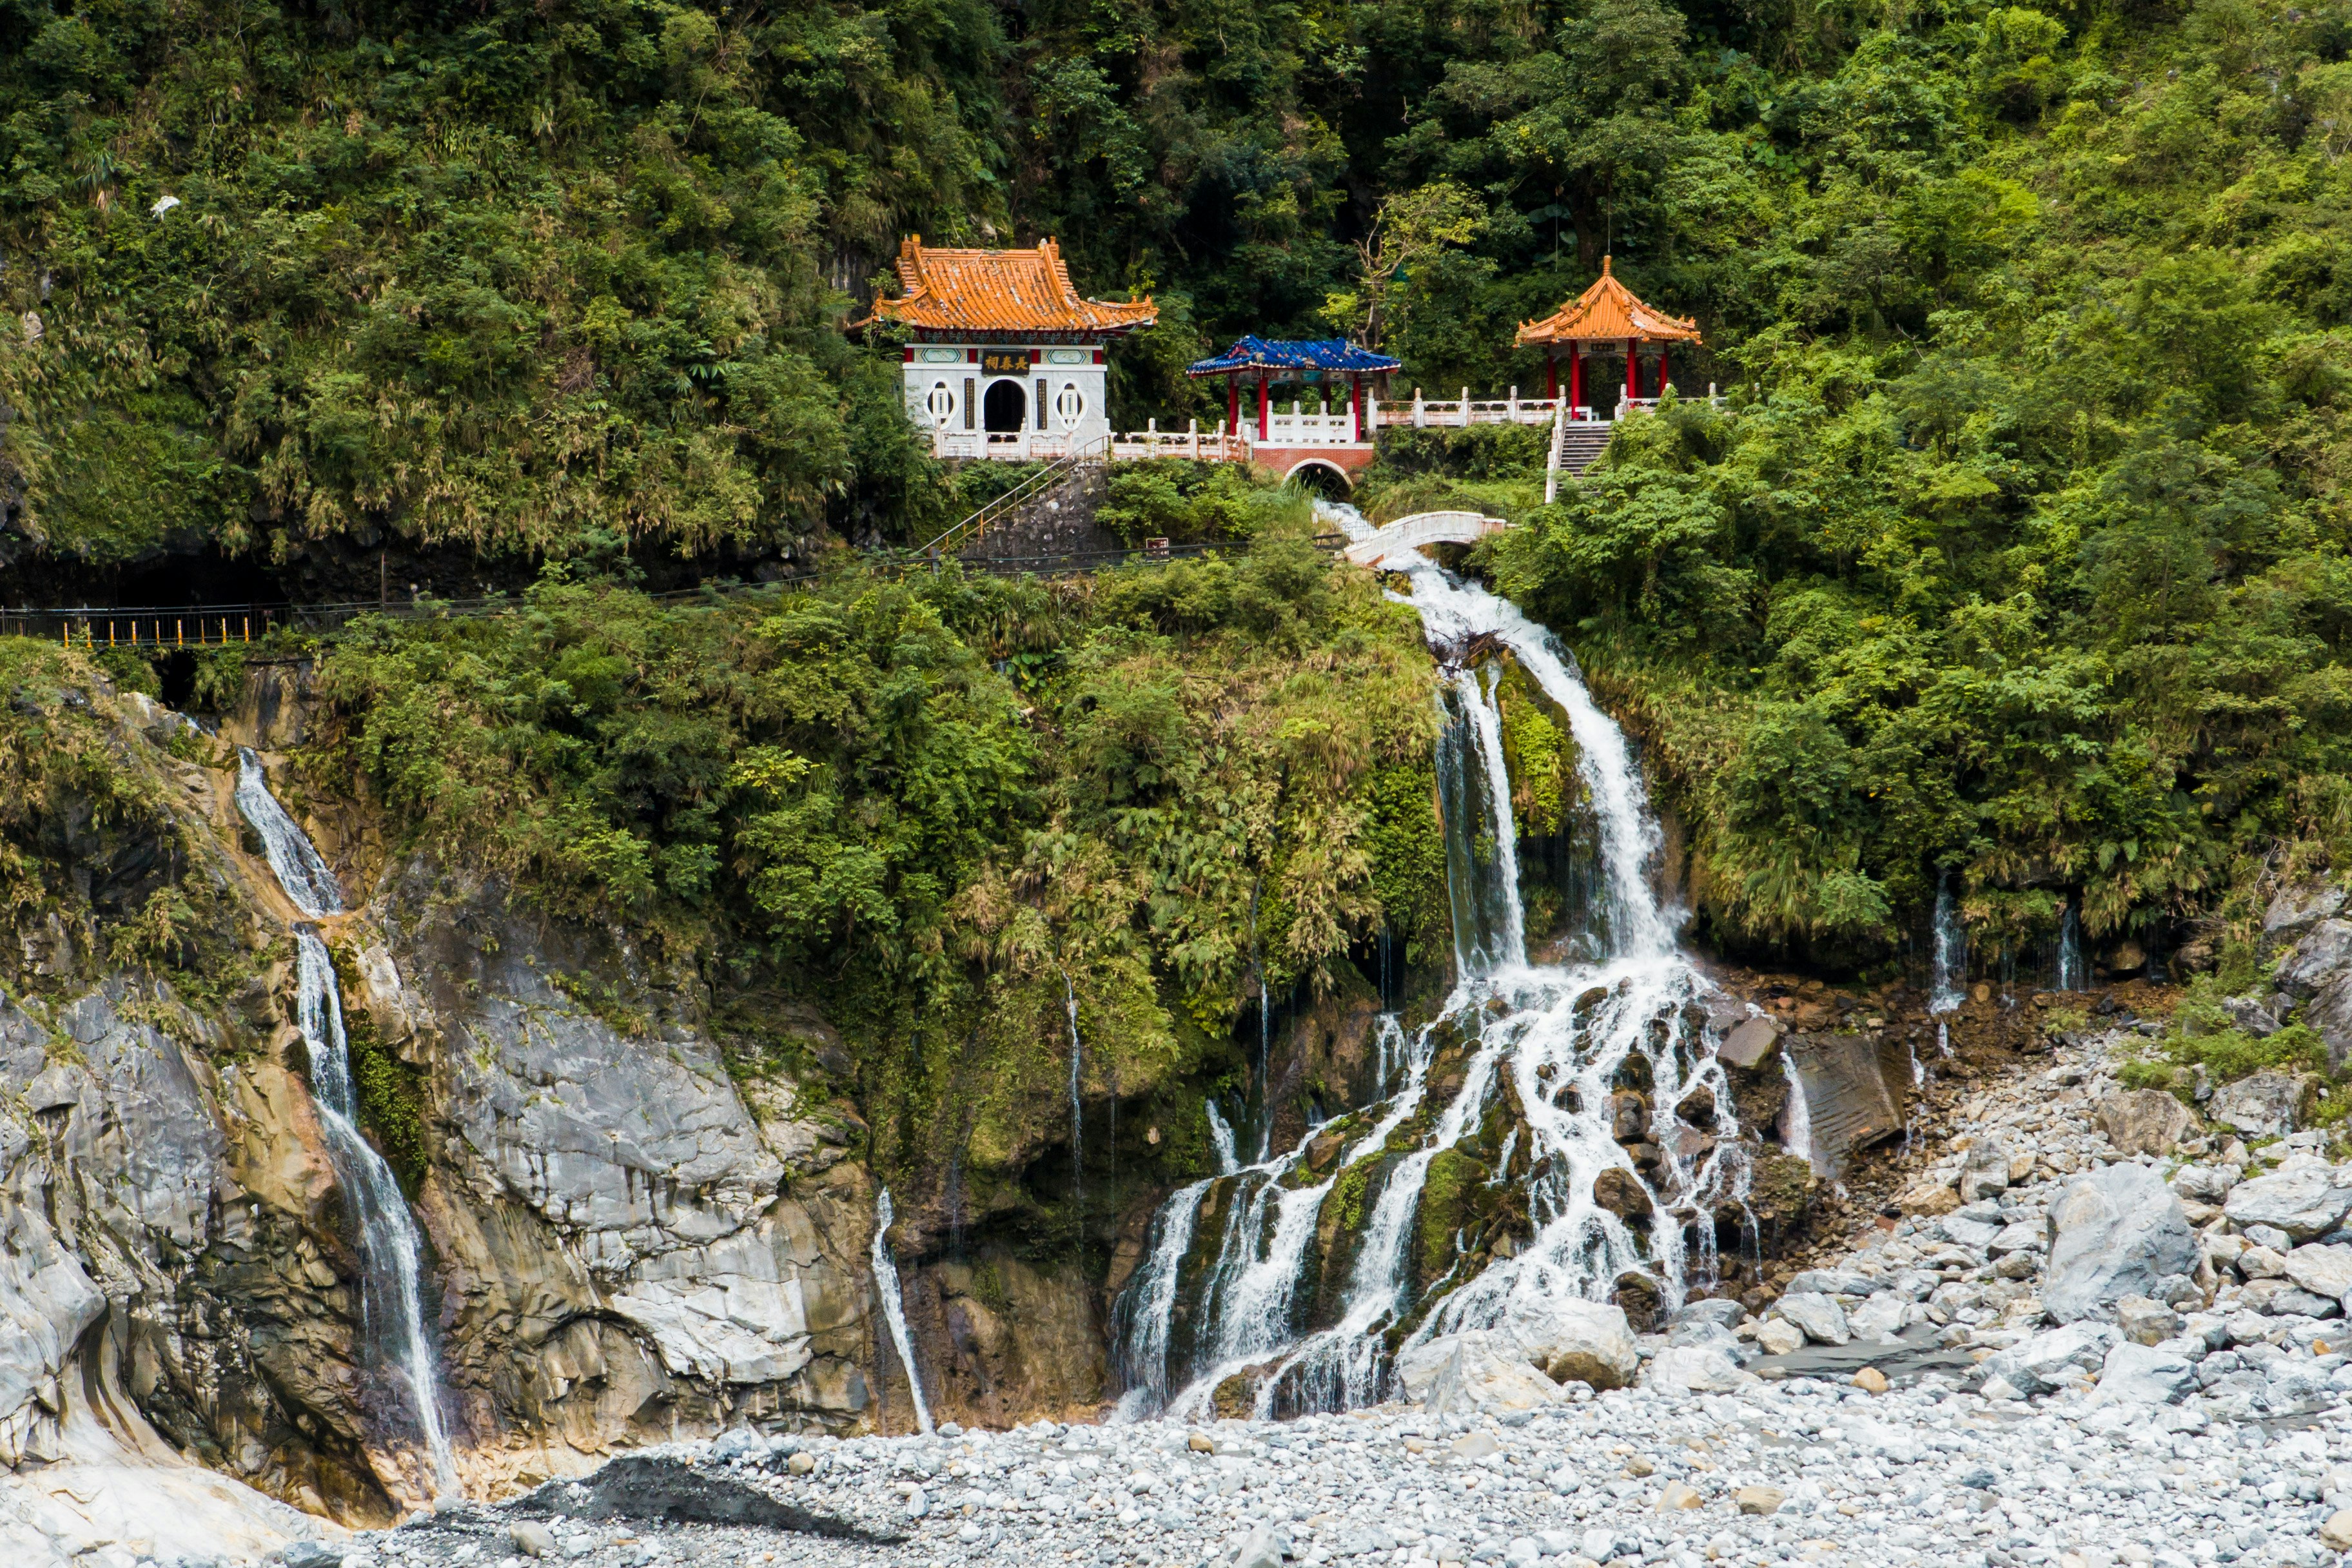 A temple in the mountains overlooking a gorge, built over rushing water